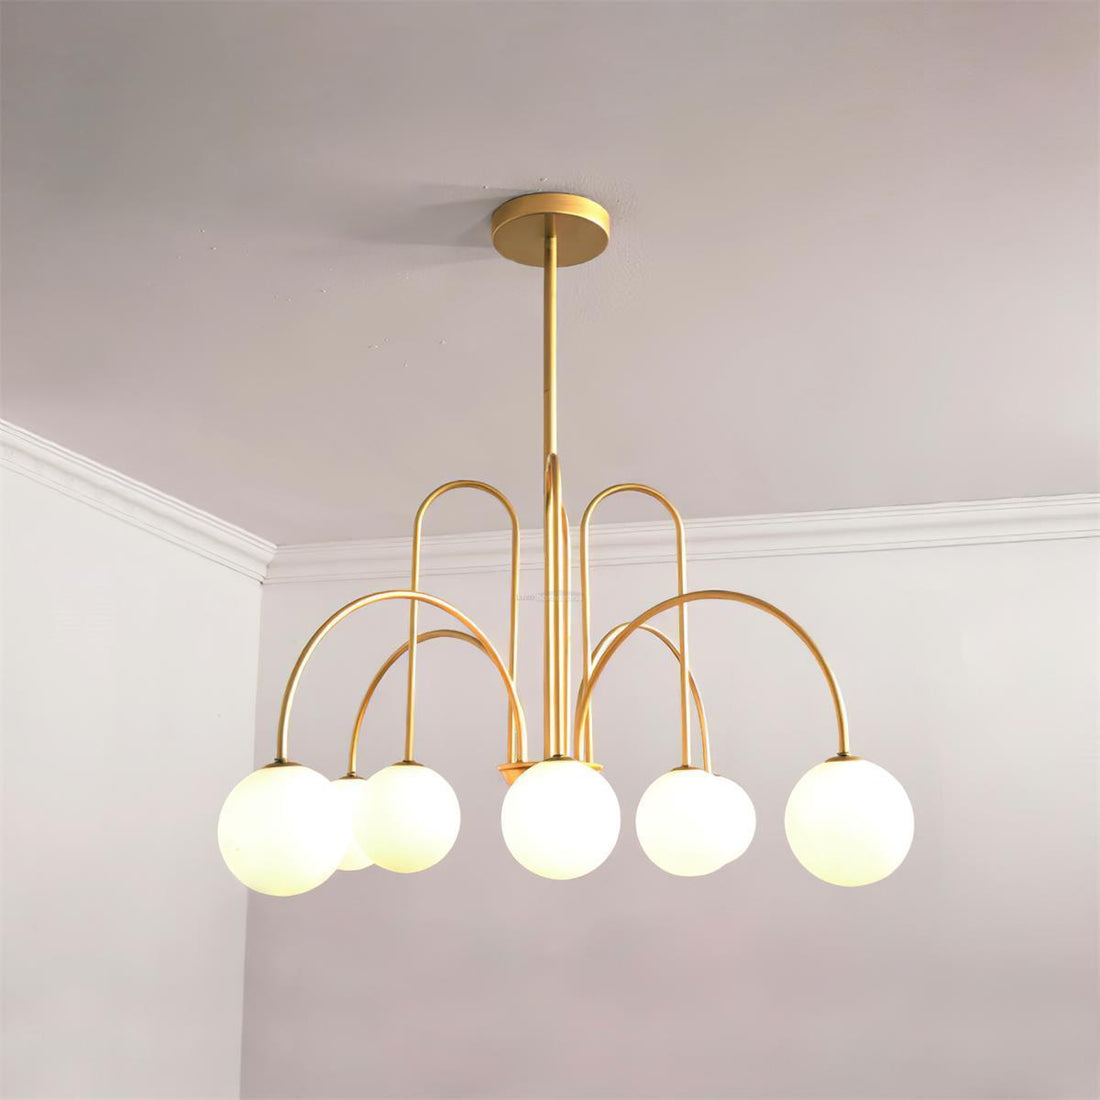 Delaney Chandelier with 6/8 heads